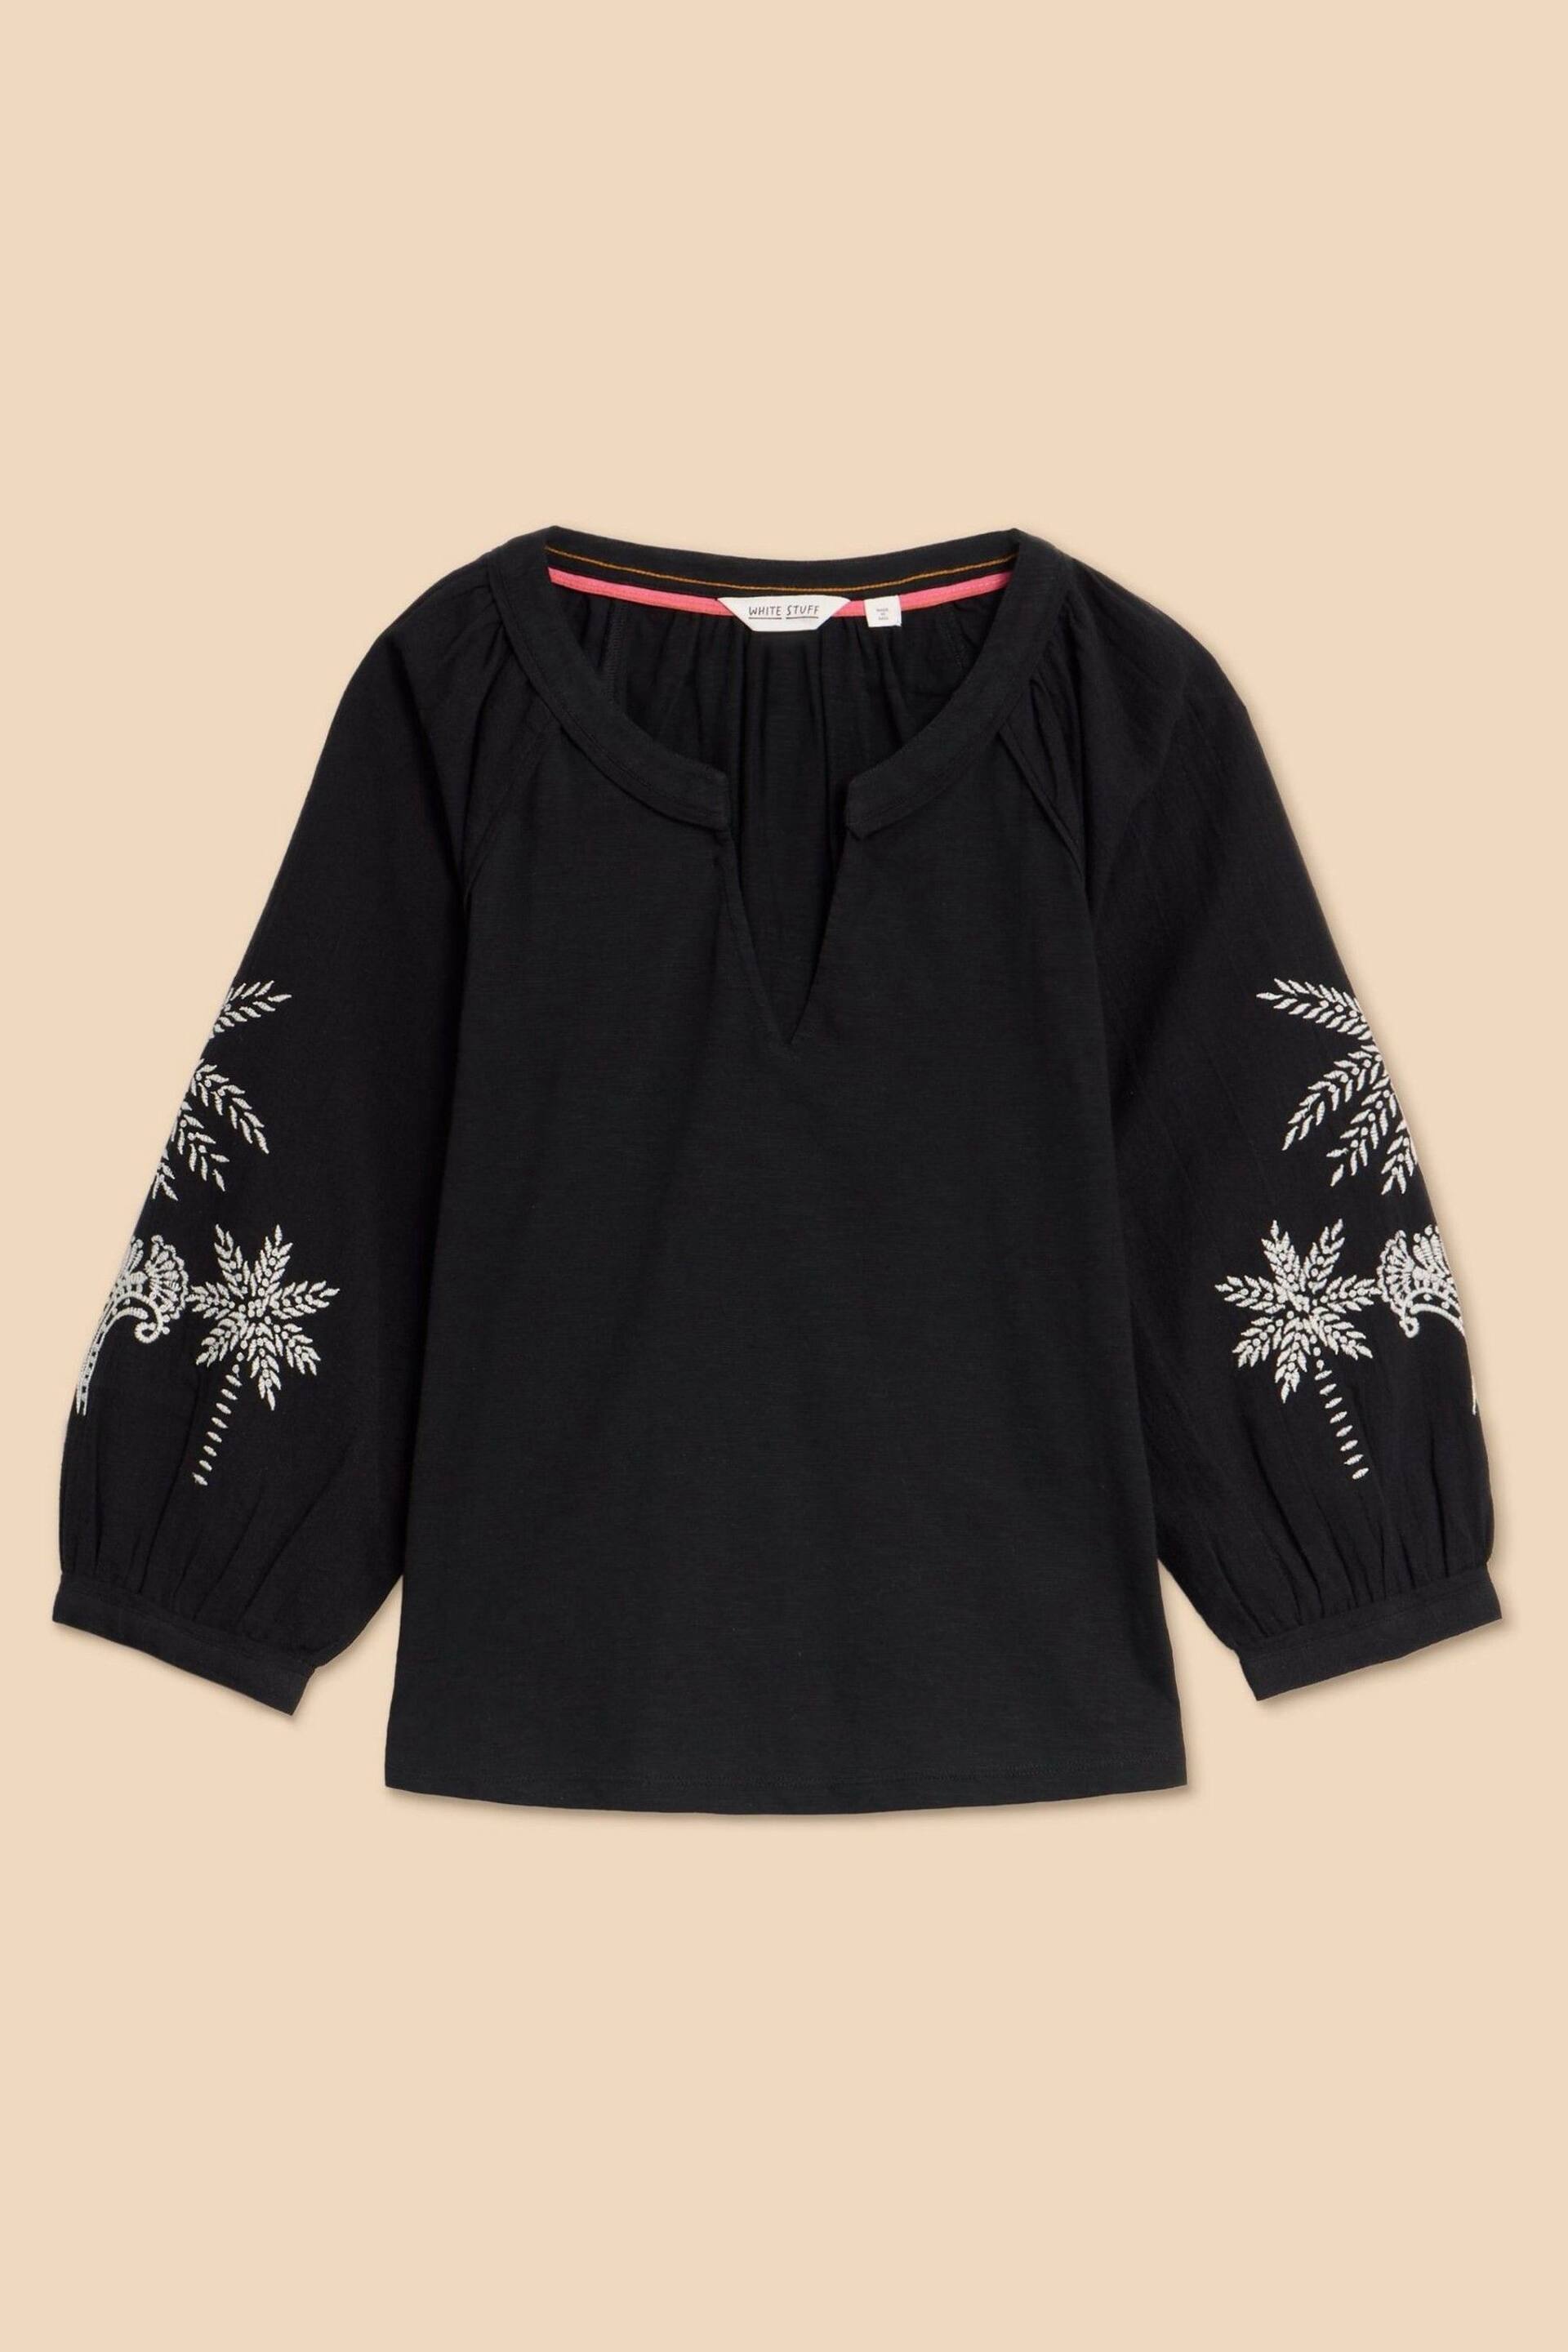 White Stuff Black Mix Embroidered Millie Top - Image 5 of 7